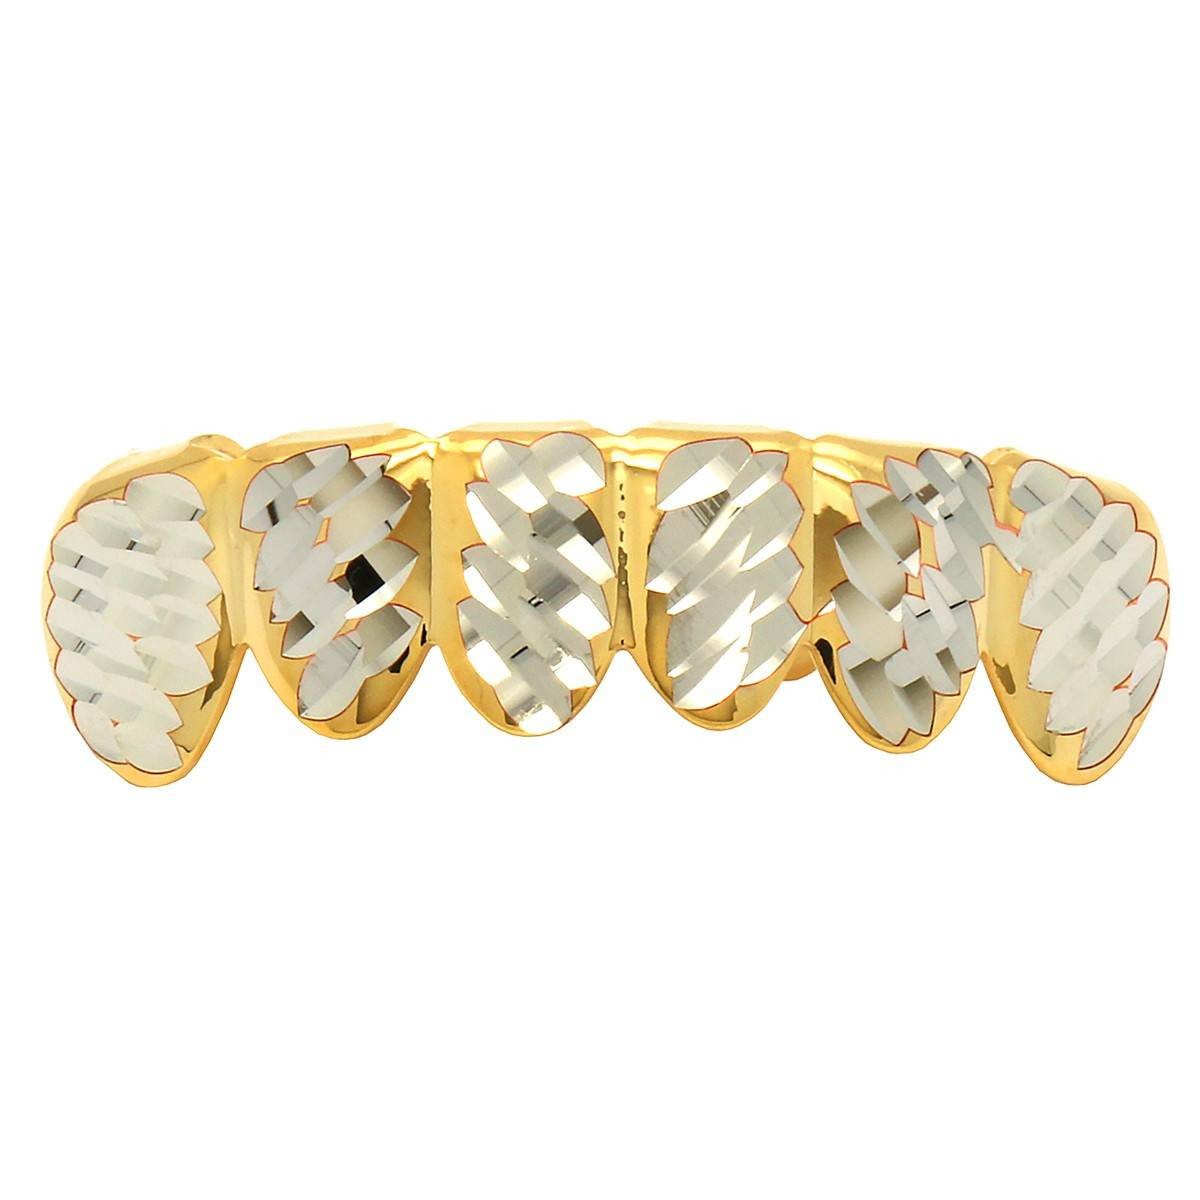 GRILLZ SET The Two-Tone Faceted